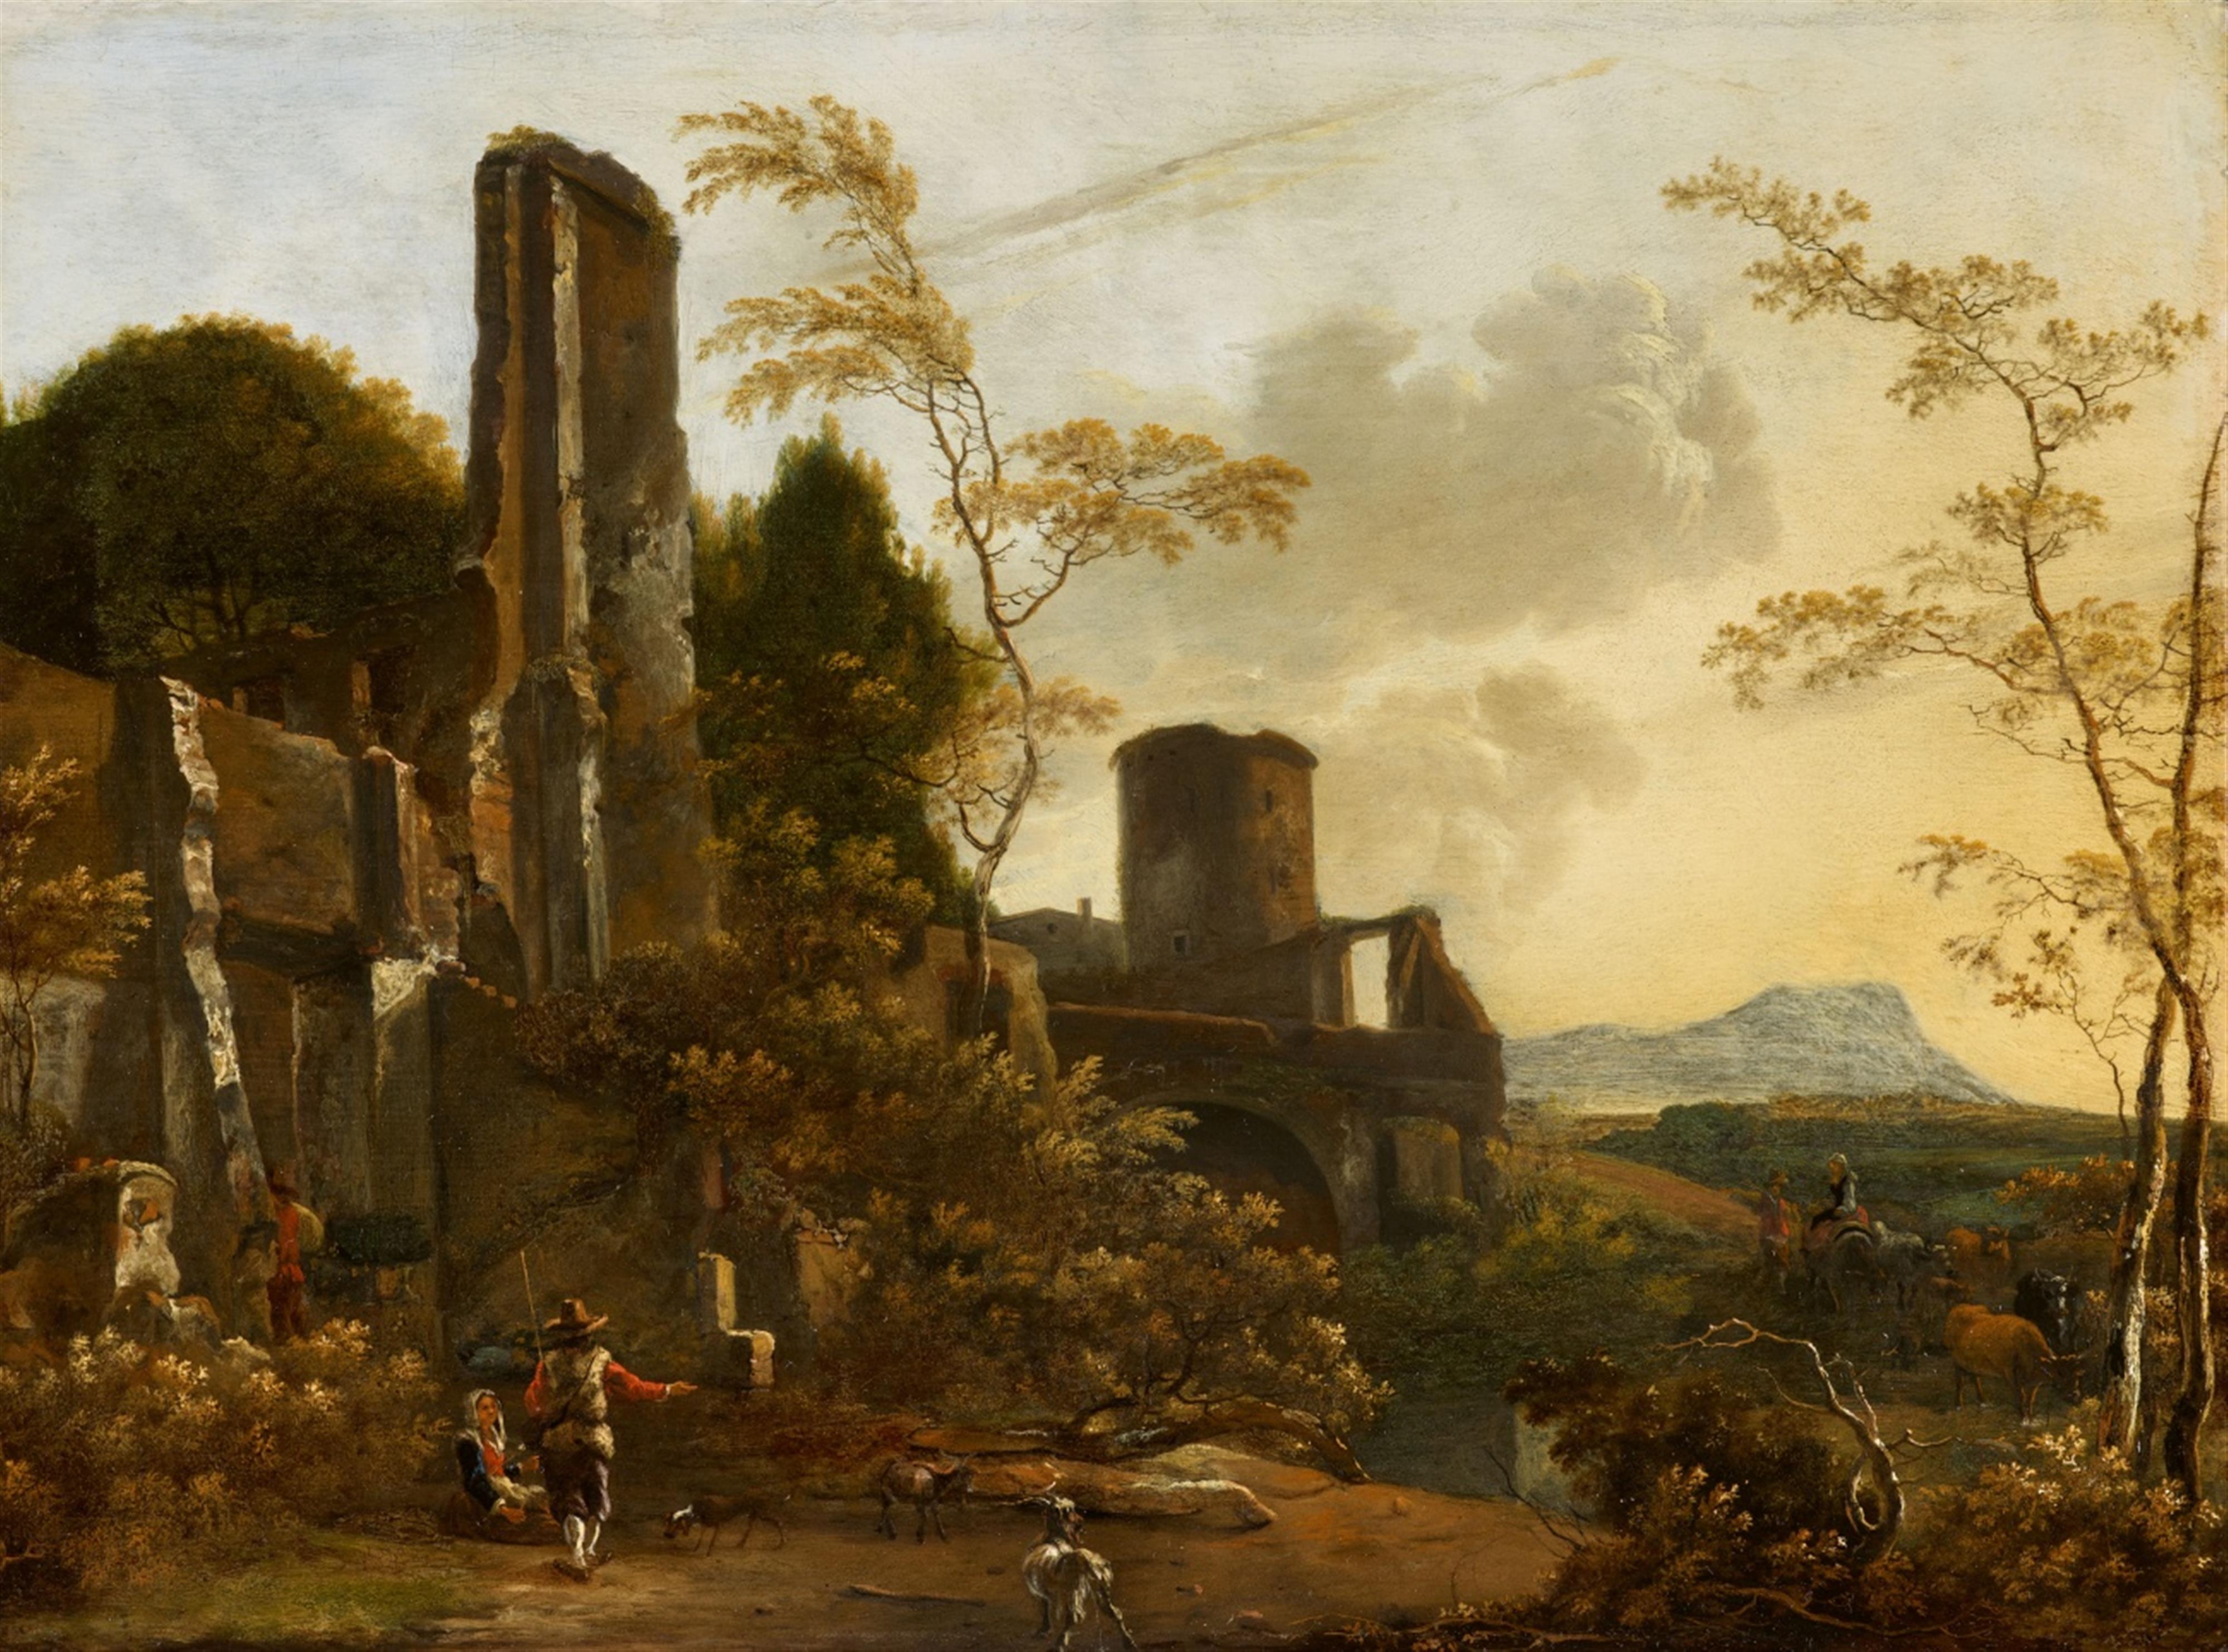 Adam Pynacker - Shepherds in a Southern Landscape with Ruins - image-1